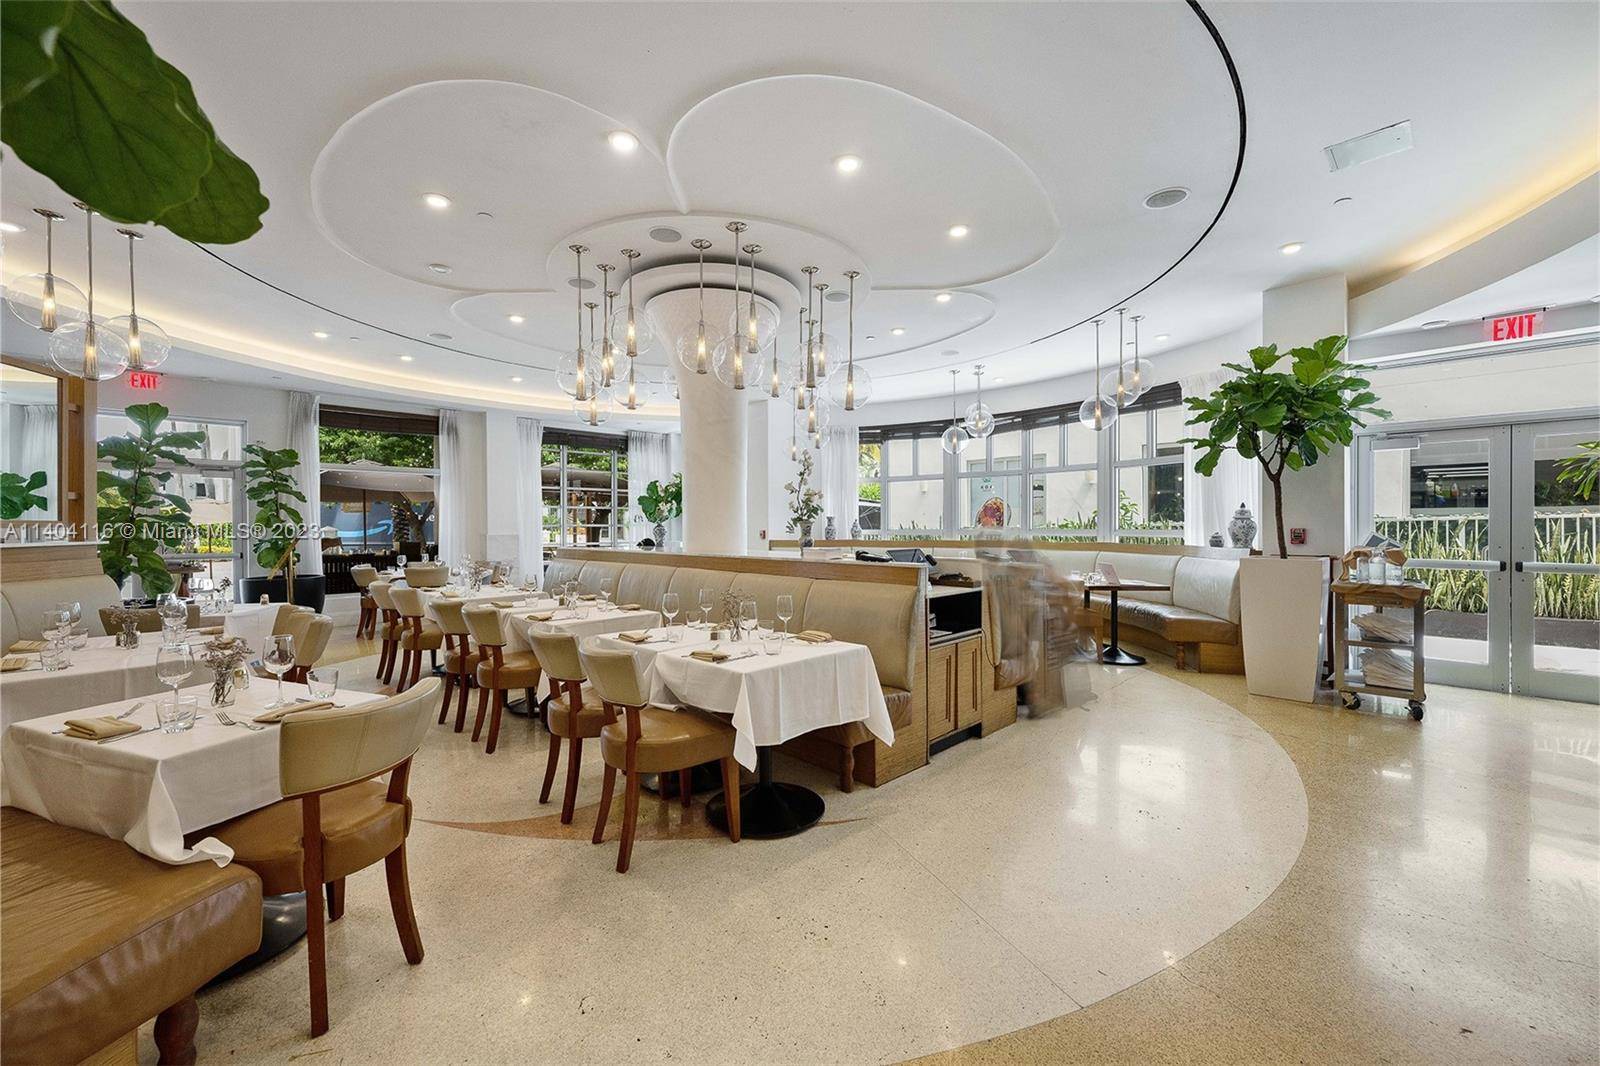 Prime Location For Lease Restaurant space situated in the heart of Miami Beach at The Berkeley Shore Hotel, one of the most vibrant and sought after areas in South Florida.